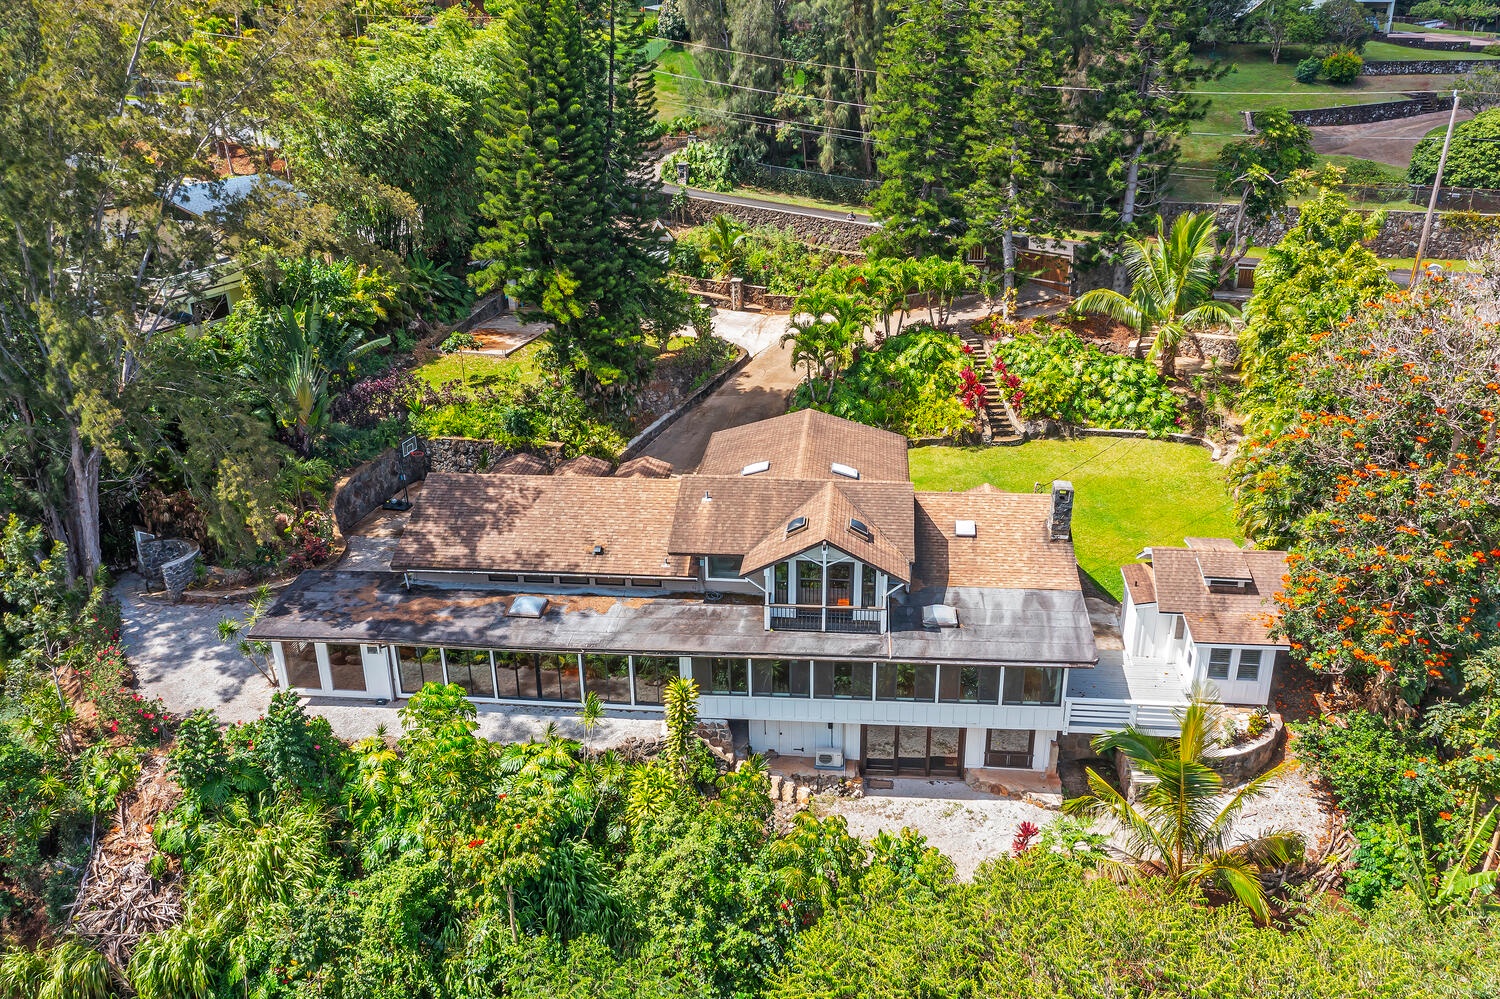 Haleiwa Vacation Rentals, Mele Makana - Overhead view of the home shows the beautiful, natural landscape that surrounds